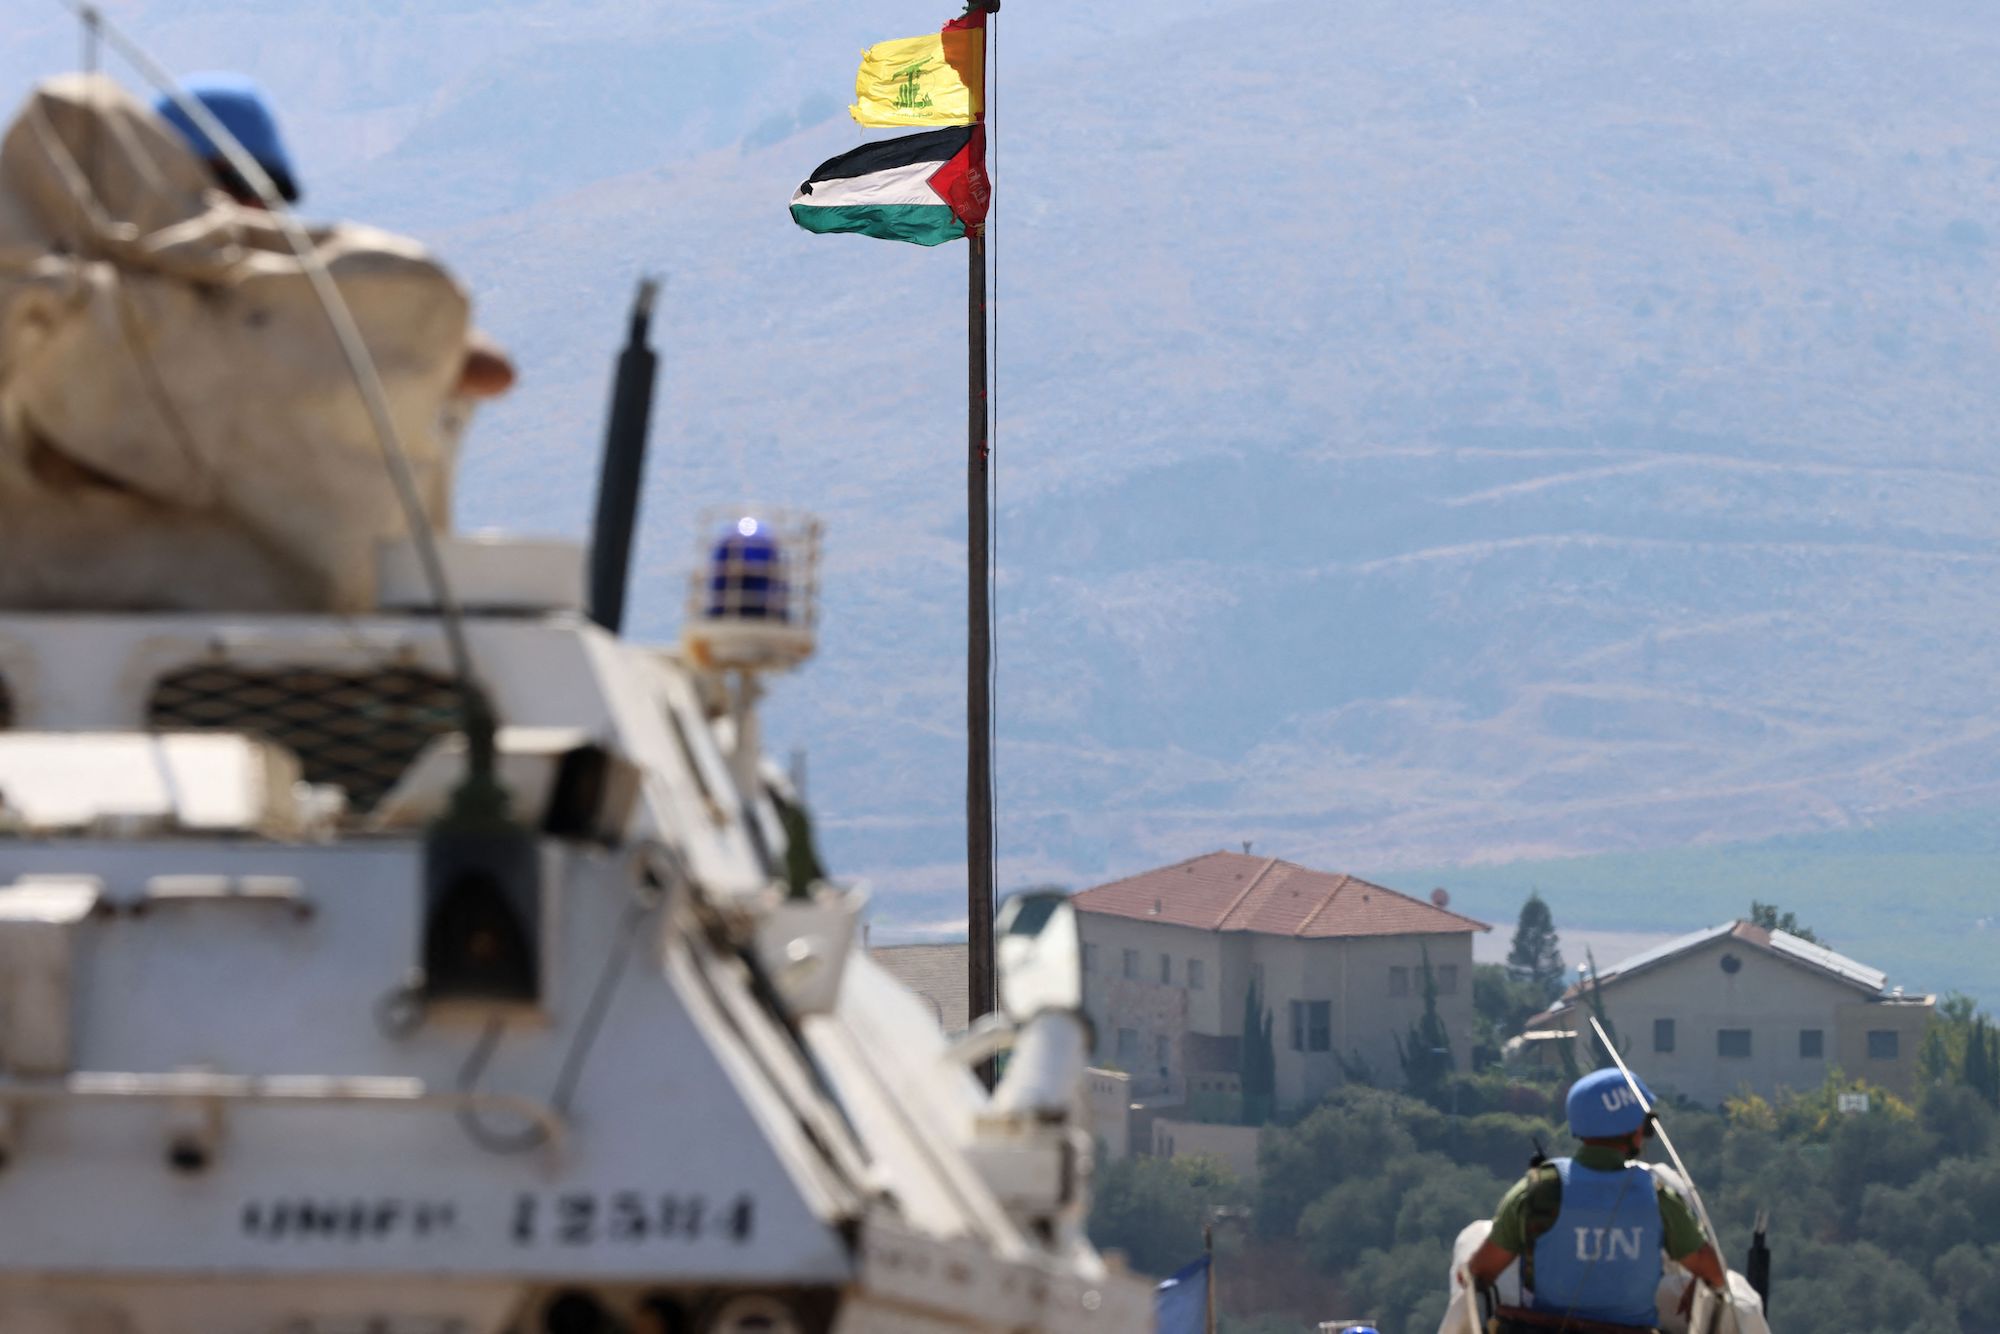 The Palestinian flag and the flag of Hezbollah are seen as UN peacekeepers patrol the border area between Lebanon and Israel on October 13.